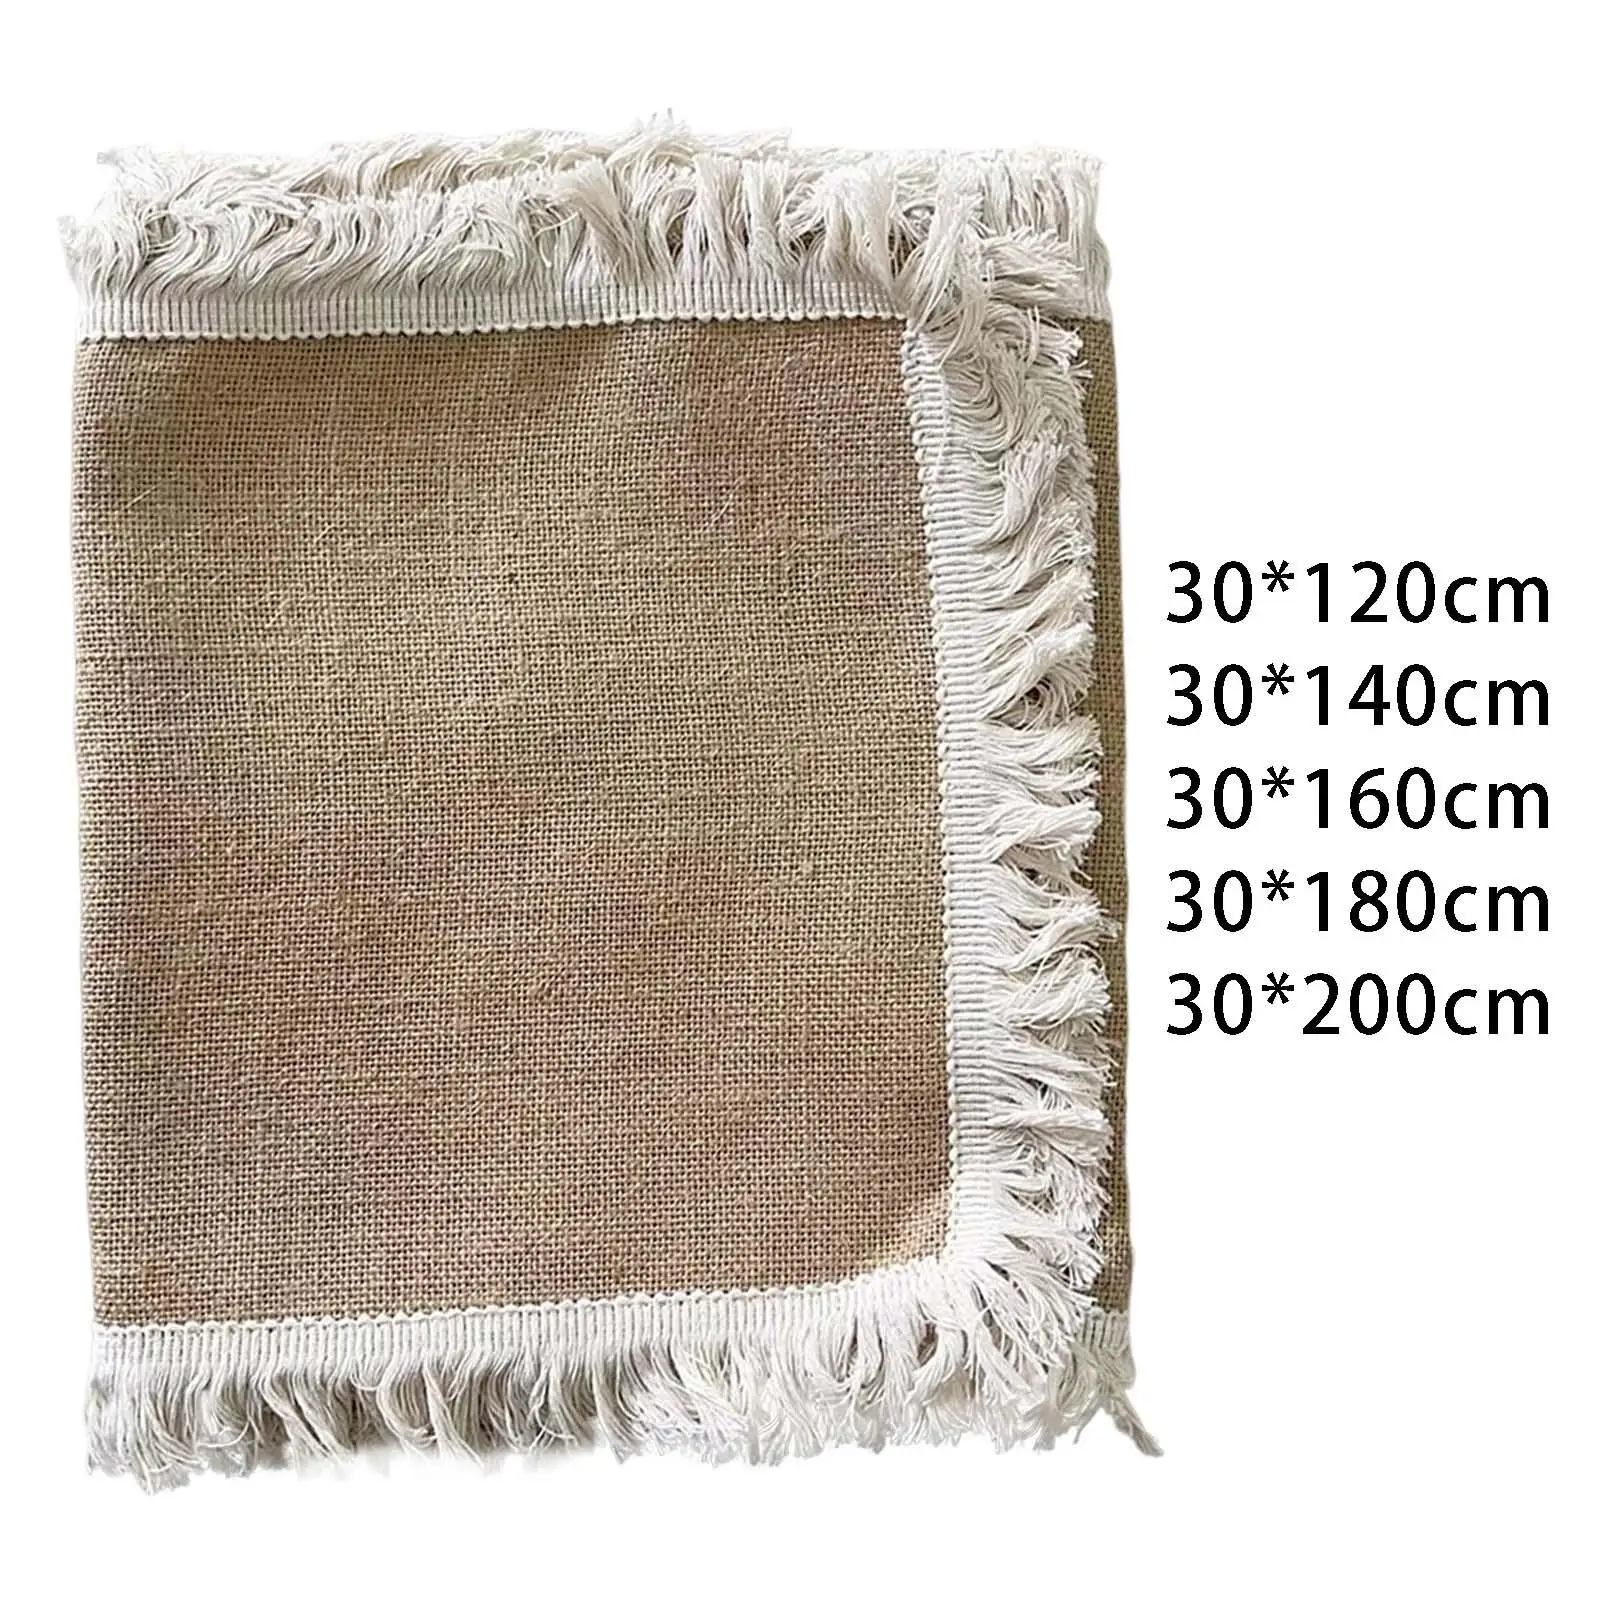 Jute Table Runner Tassel Decoration Woven Breathable Beige Tablecloth for Kitchen Banquet Picnic Tables Gardens Coffee Tables